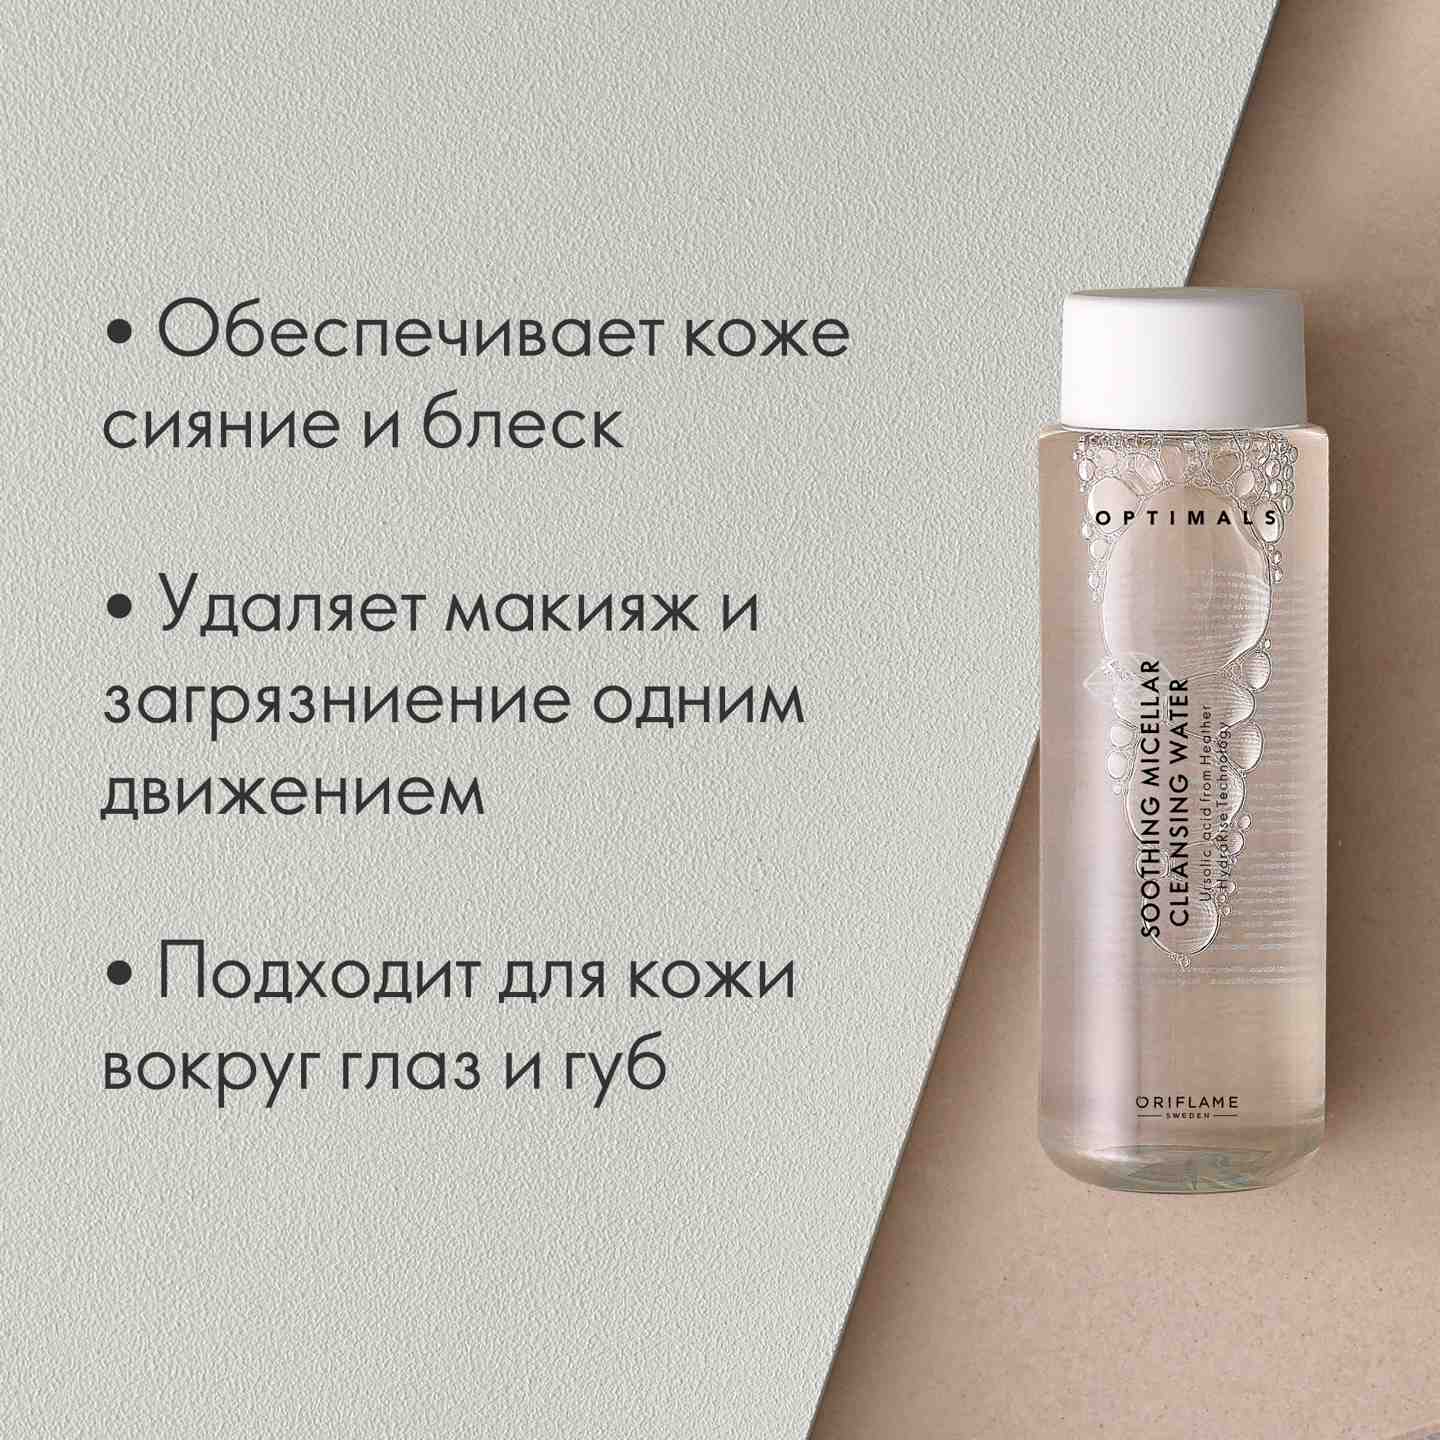 https://media-cdn.oriflame.com/productImage?externalMediaId=product-management-media%2fProducts%2f42610%2fGE%2f42610_4.png&id=15087749&version=1